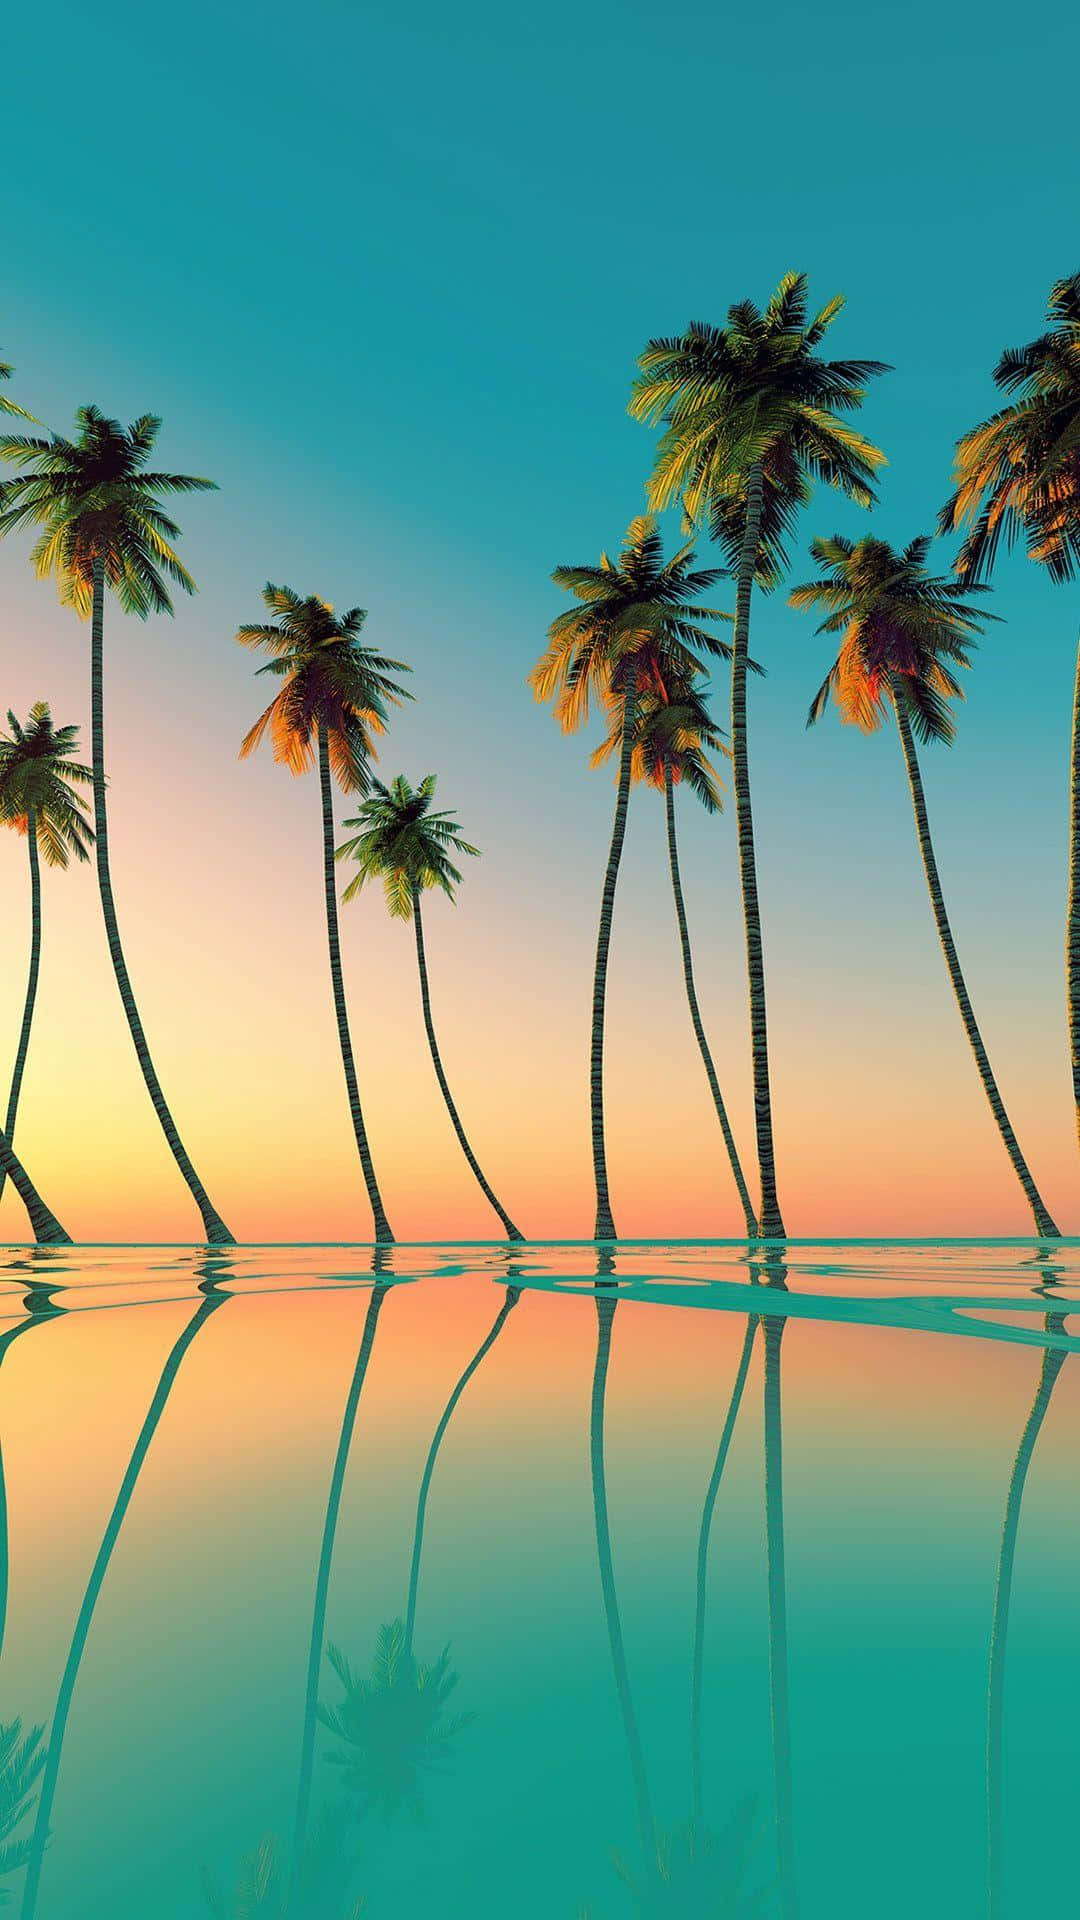 Tropical palm trees cast a stunning silhouette against the sunny sky Wallpaper